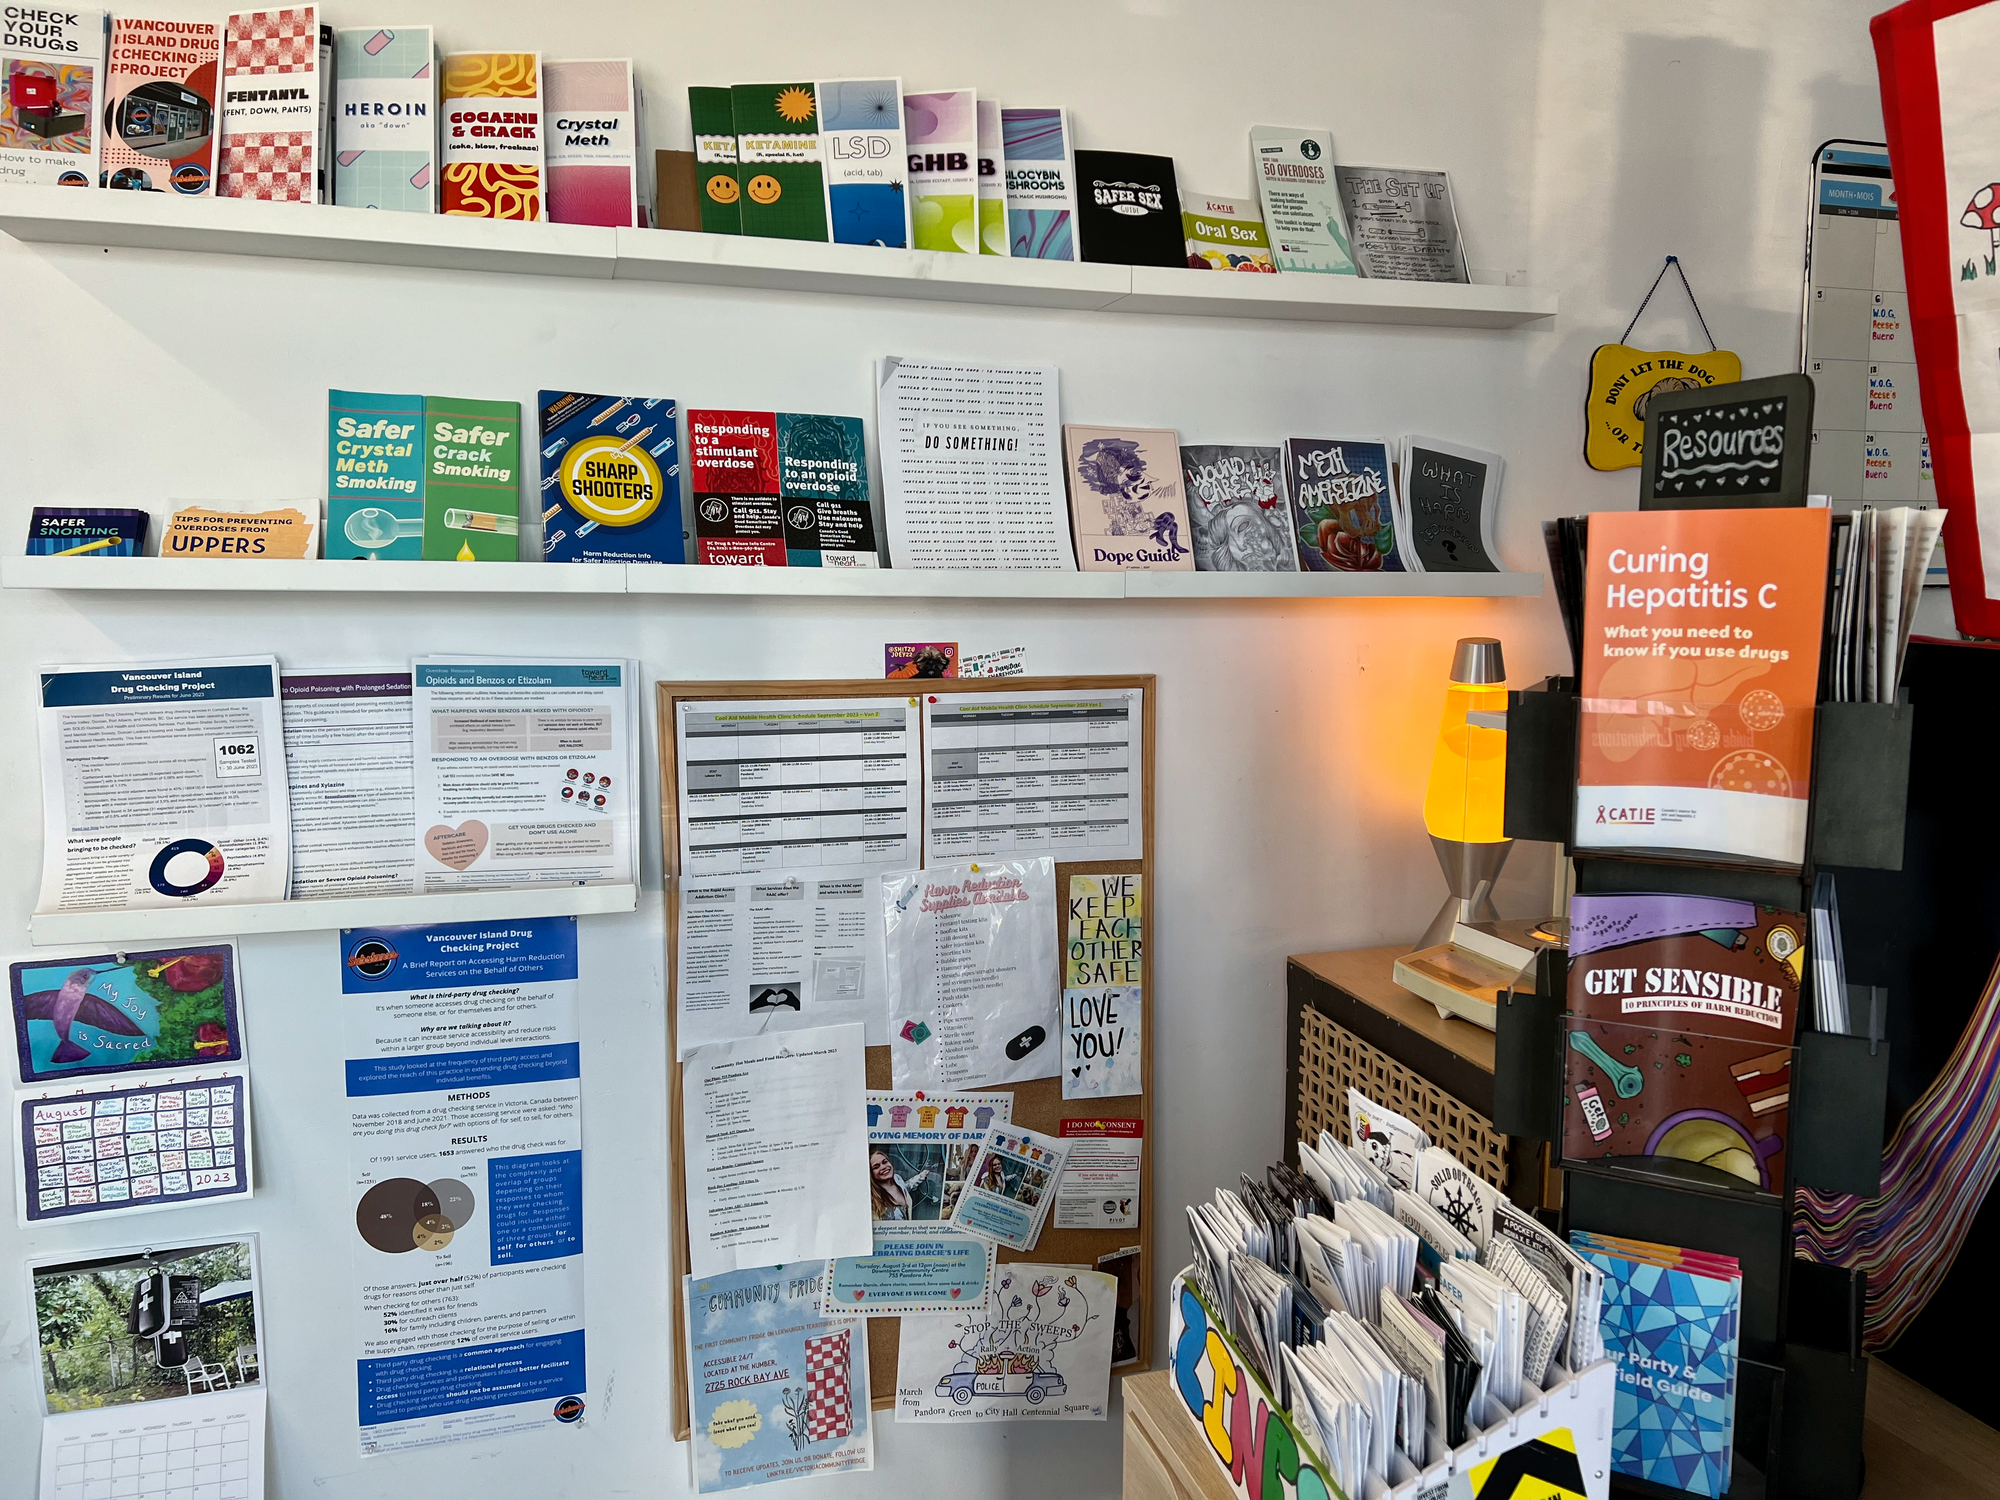 Pamphlets, zines, reports, affirmations, and local resources all to be found within Substance's harm reduction library 